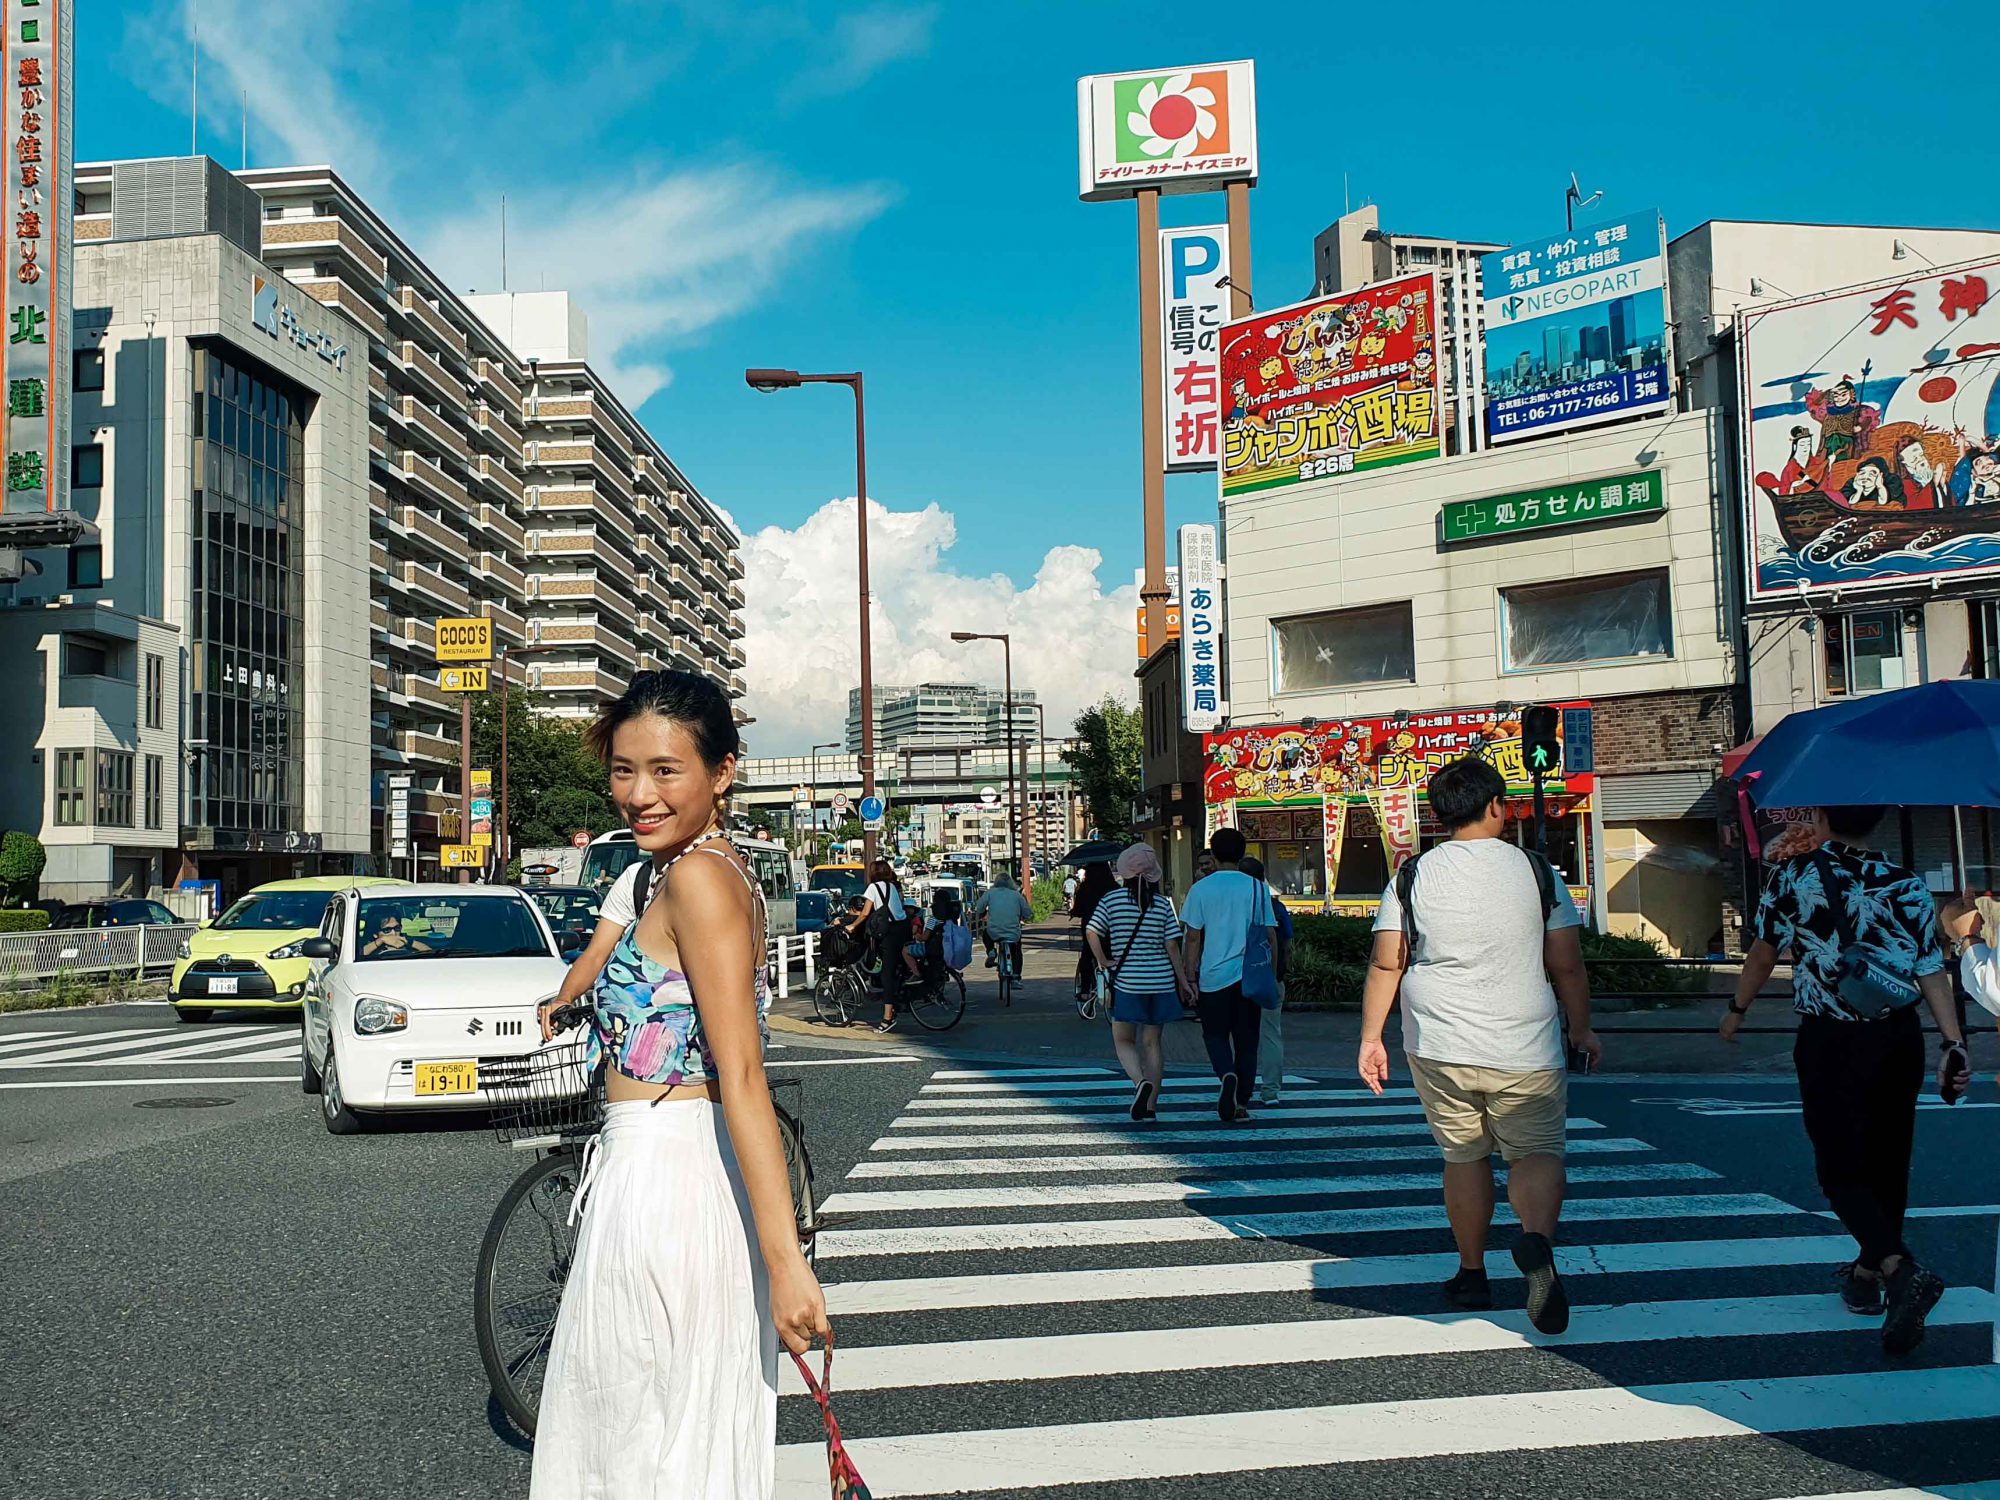 How to make the best 72 hrs. in OSAKA!